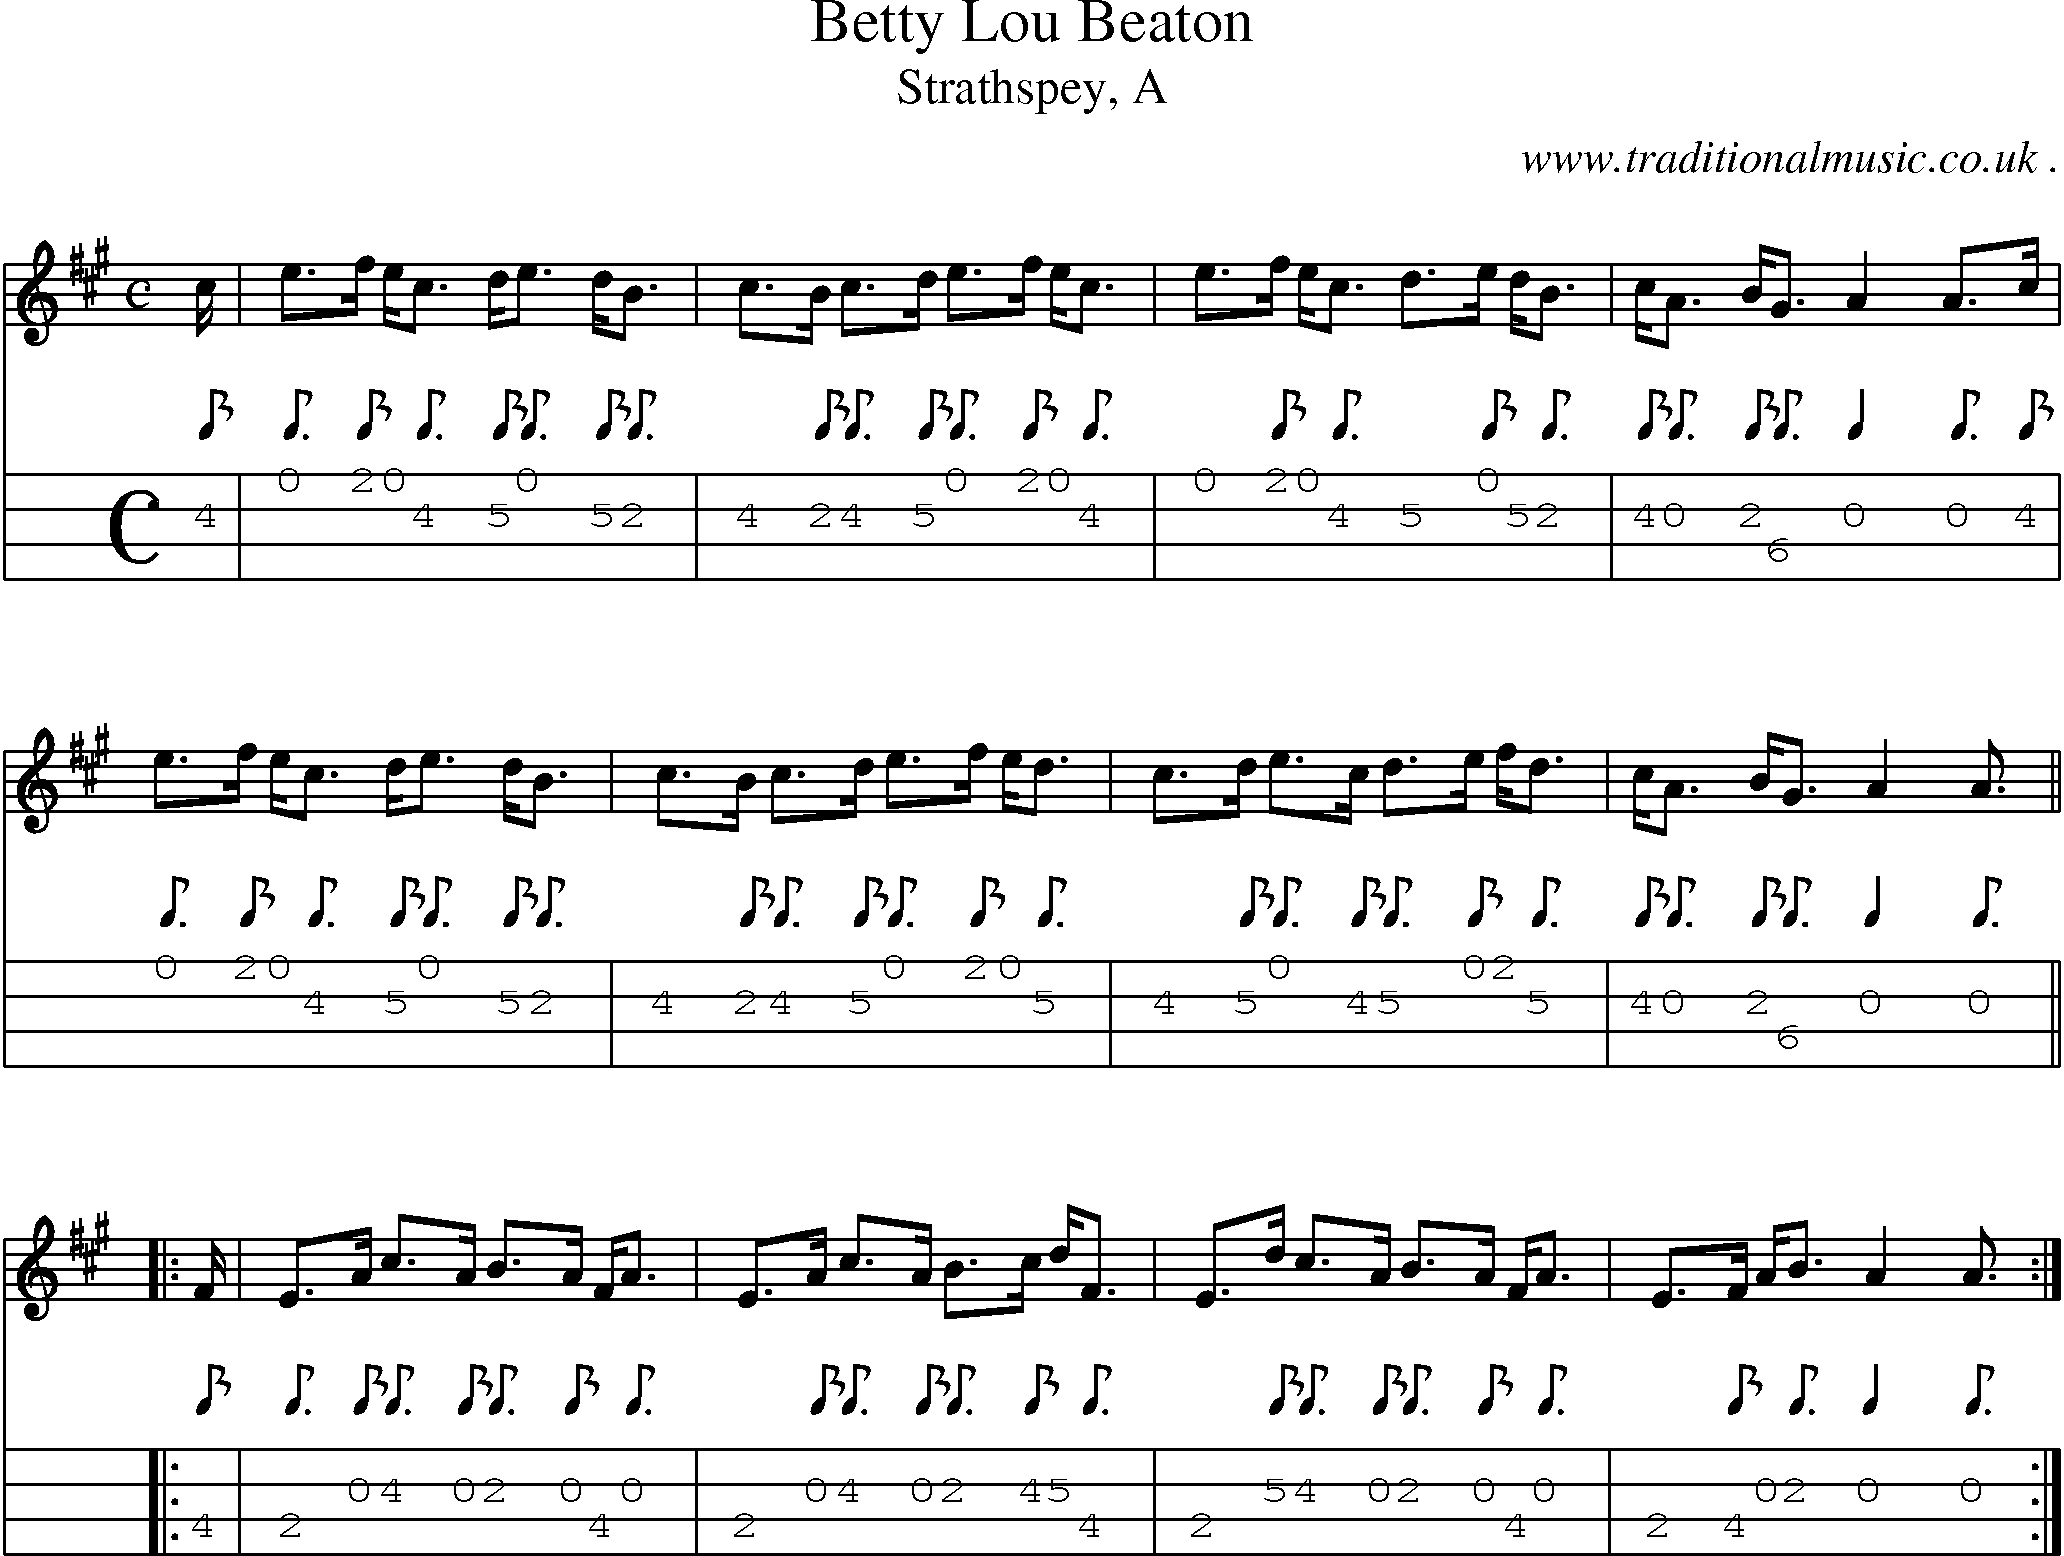 Sheet-music  score, Chords and Mandolin Tabs for Betty Lou Beaton